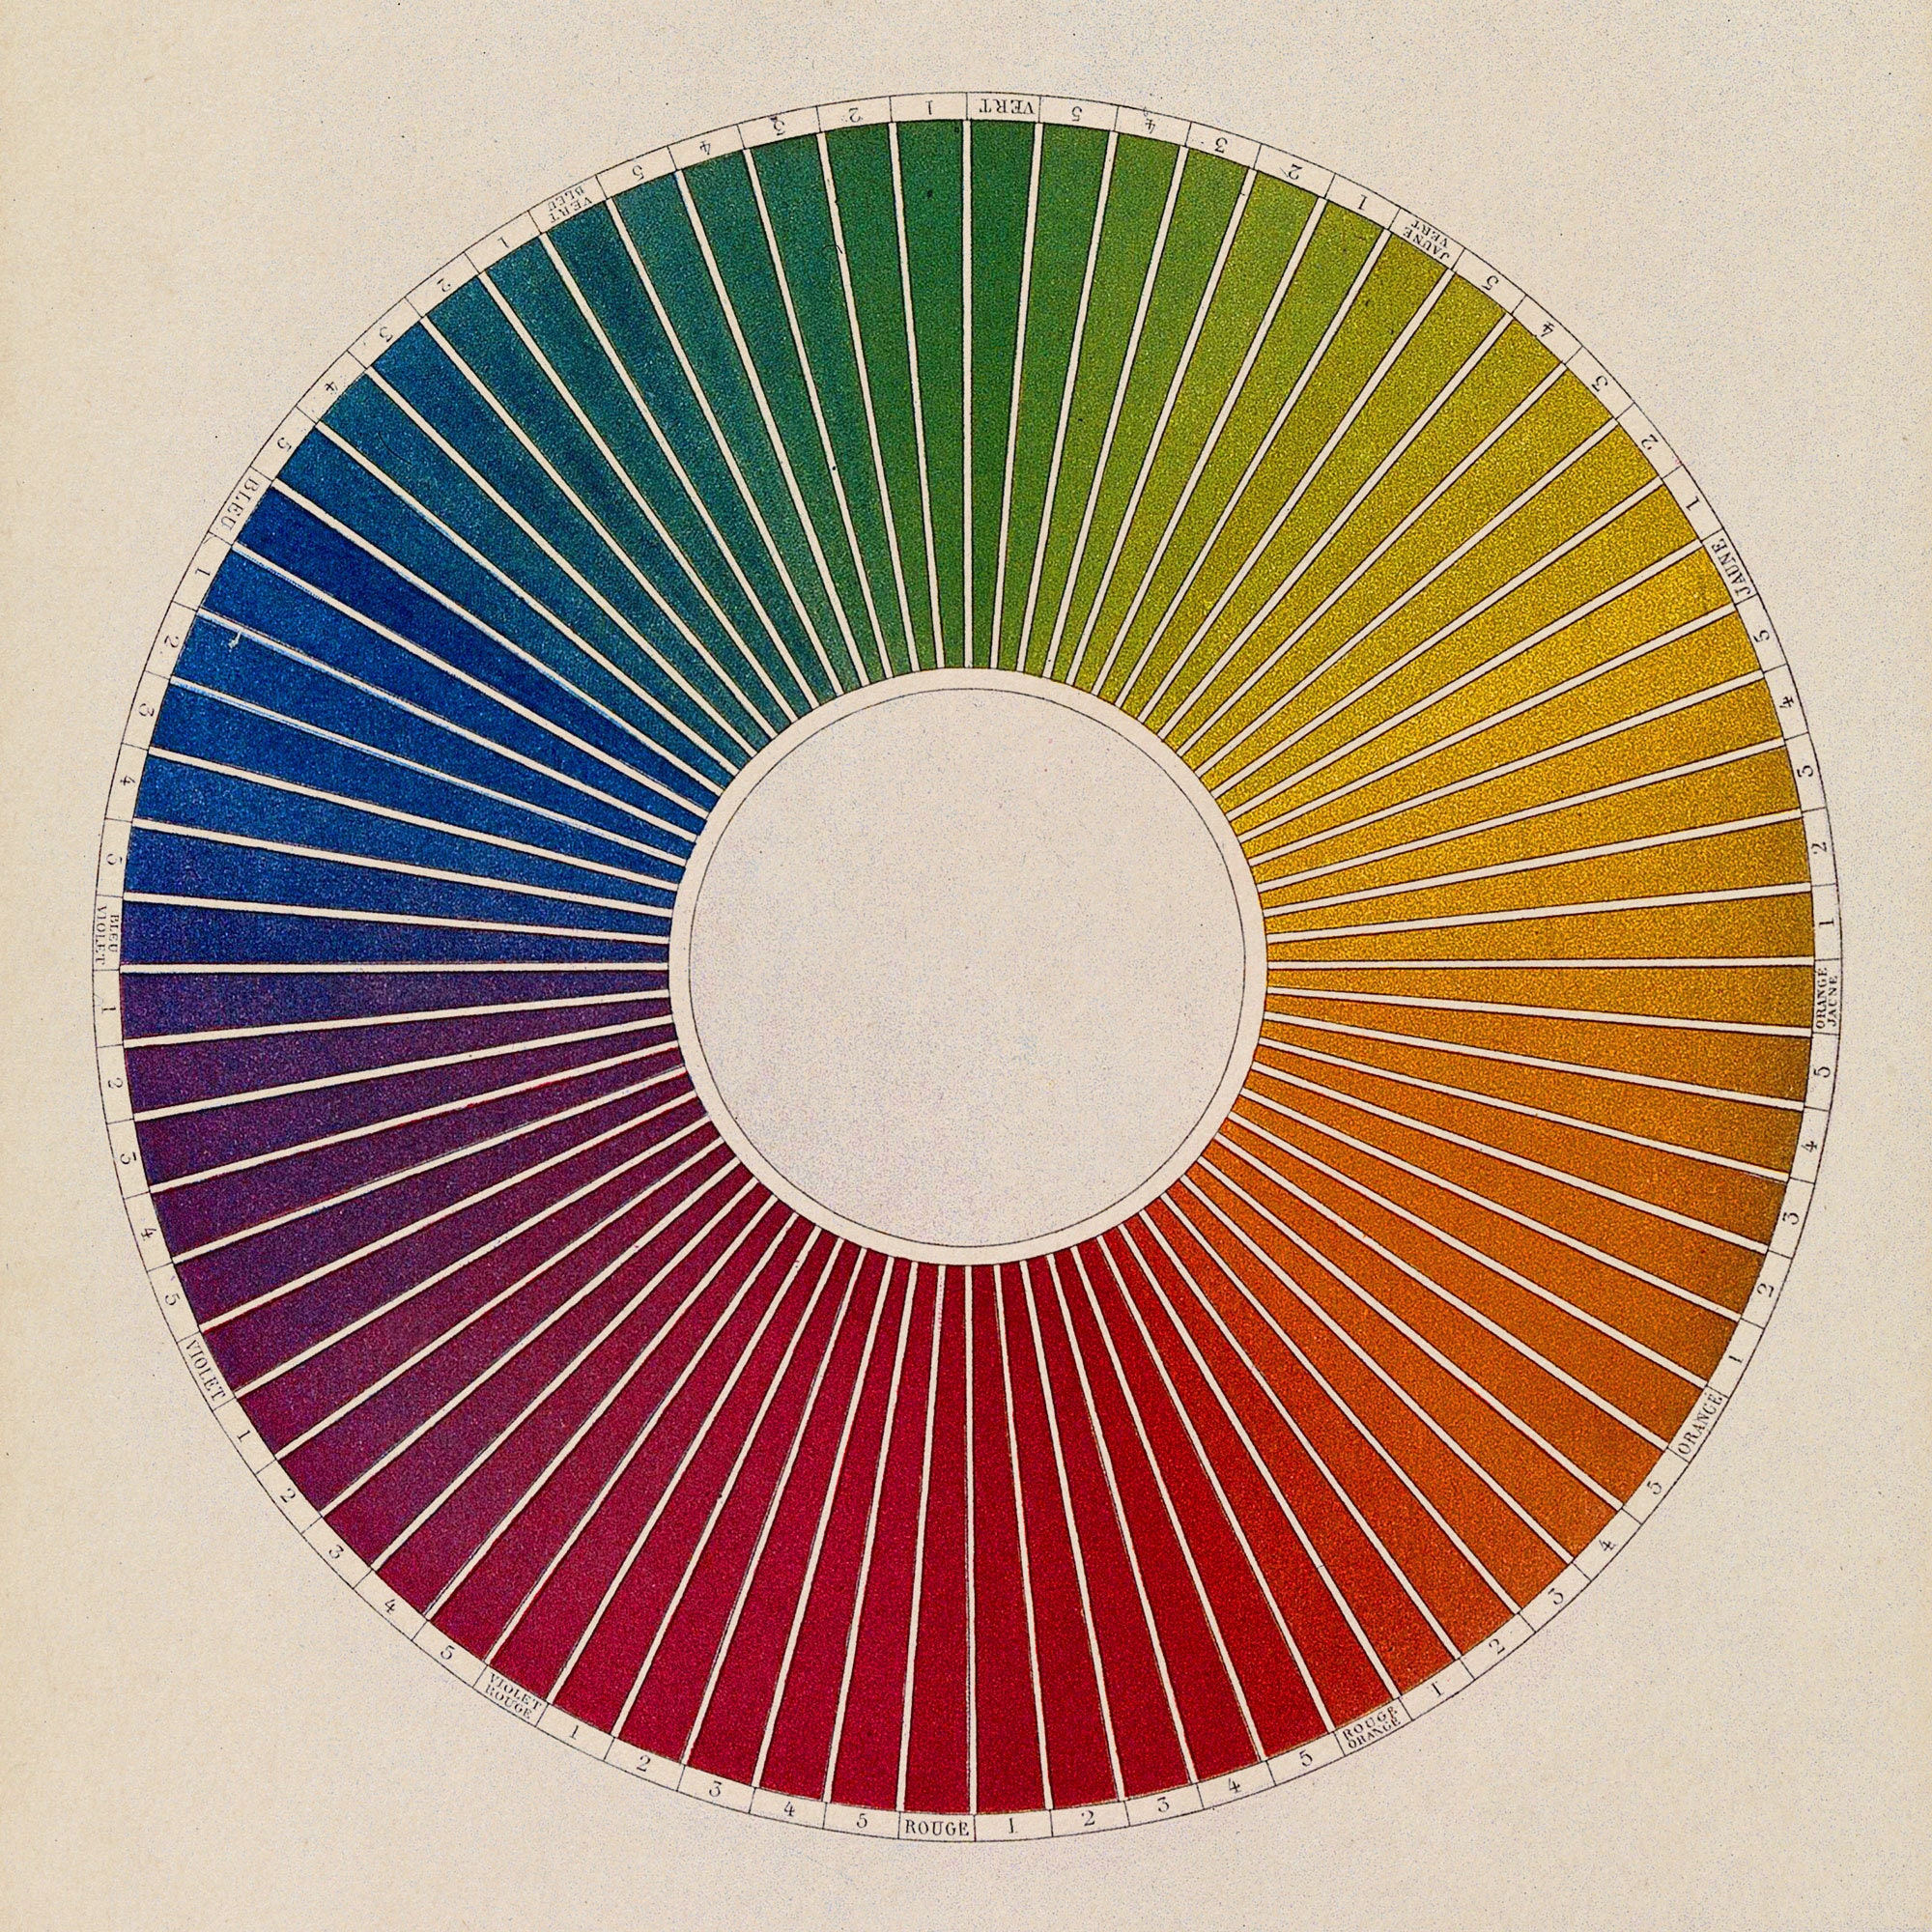  Vintage Color Wheel Print for Art Studio, Classroom, or Home.  Fine Art Paper, Laminated, Framed, or w/Hanger. Multiples Sizes : Handmade  Products